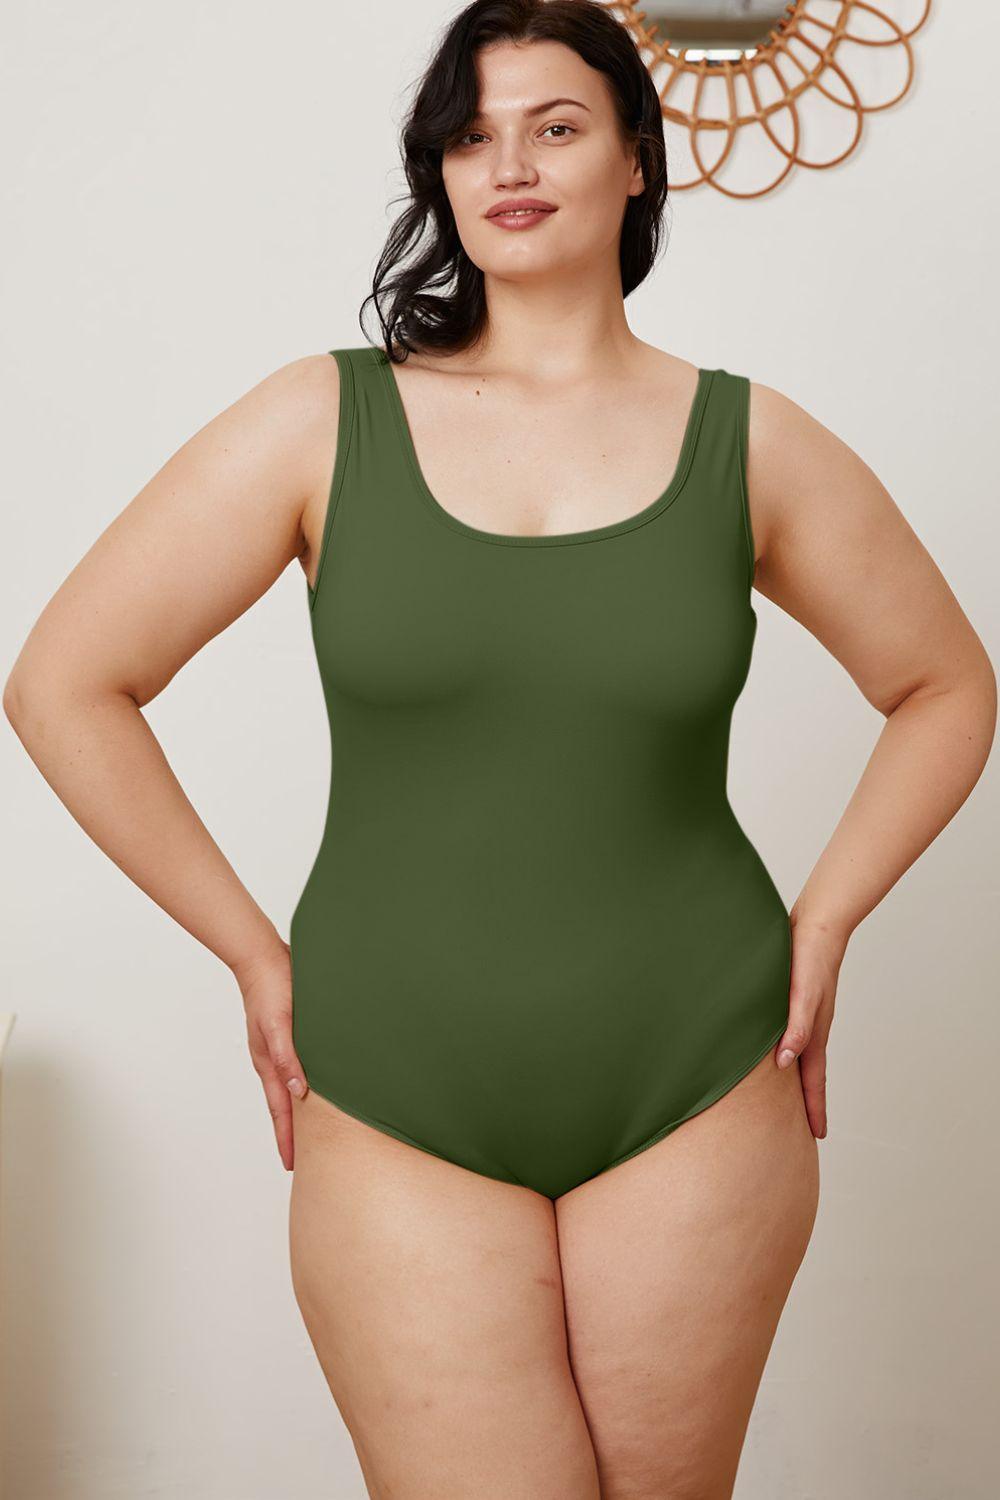 a woman in a green swimsuit posing for a picture